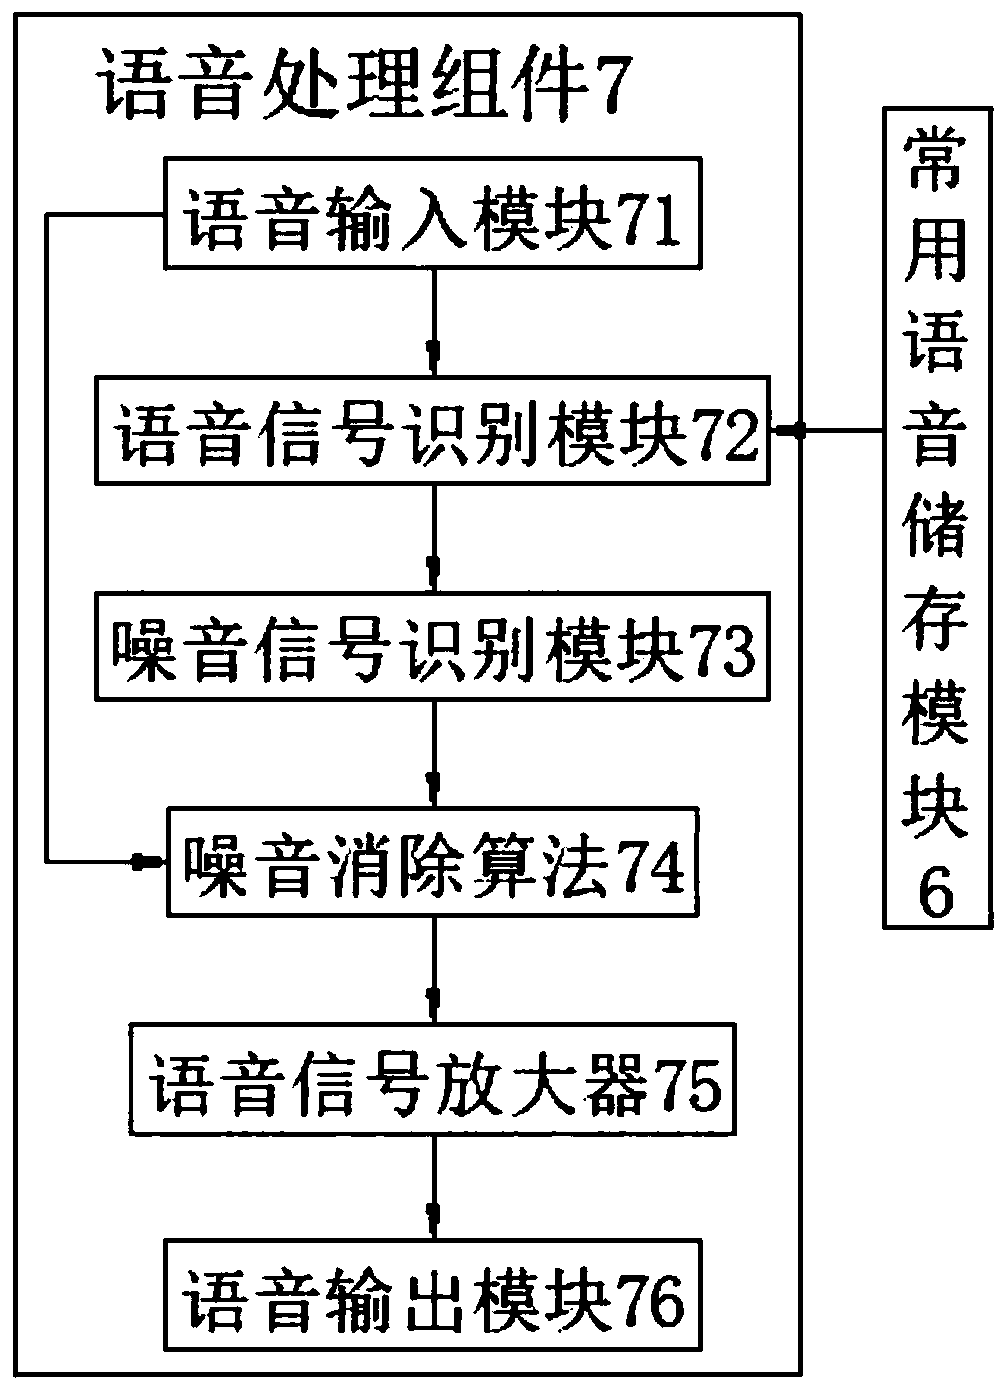 Voice recognition device and method